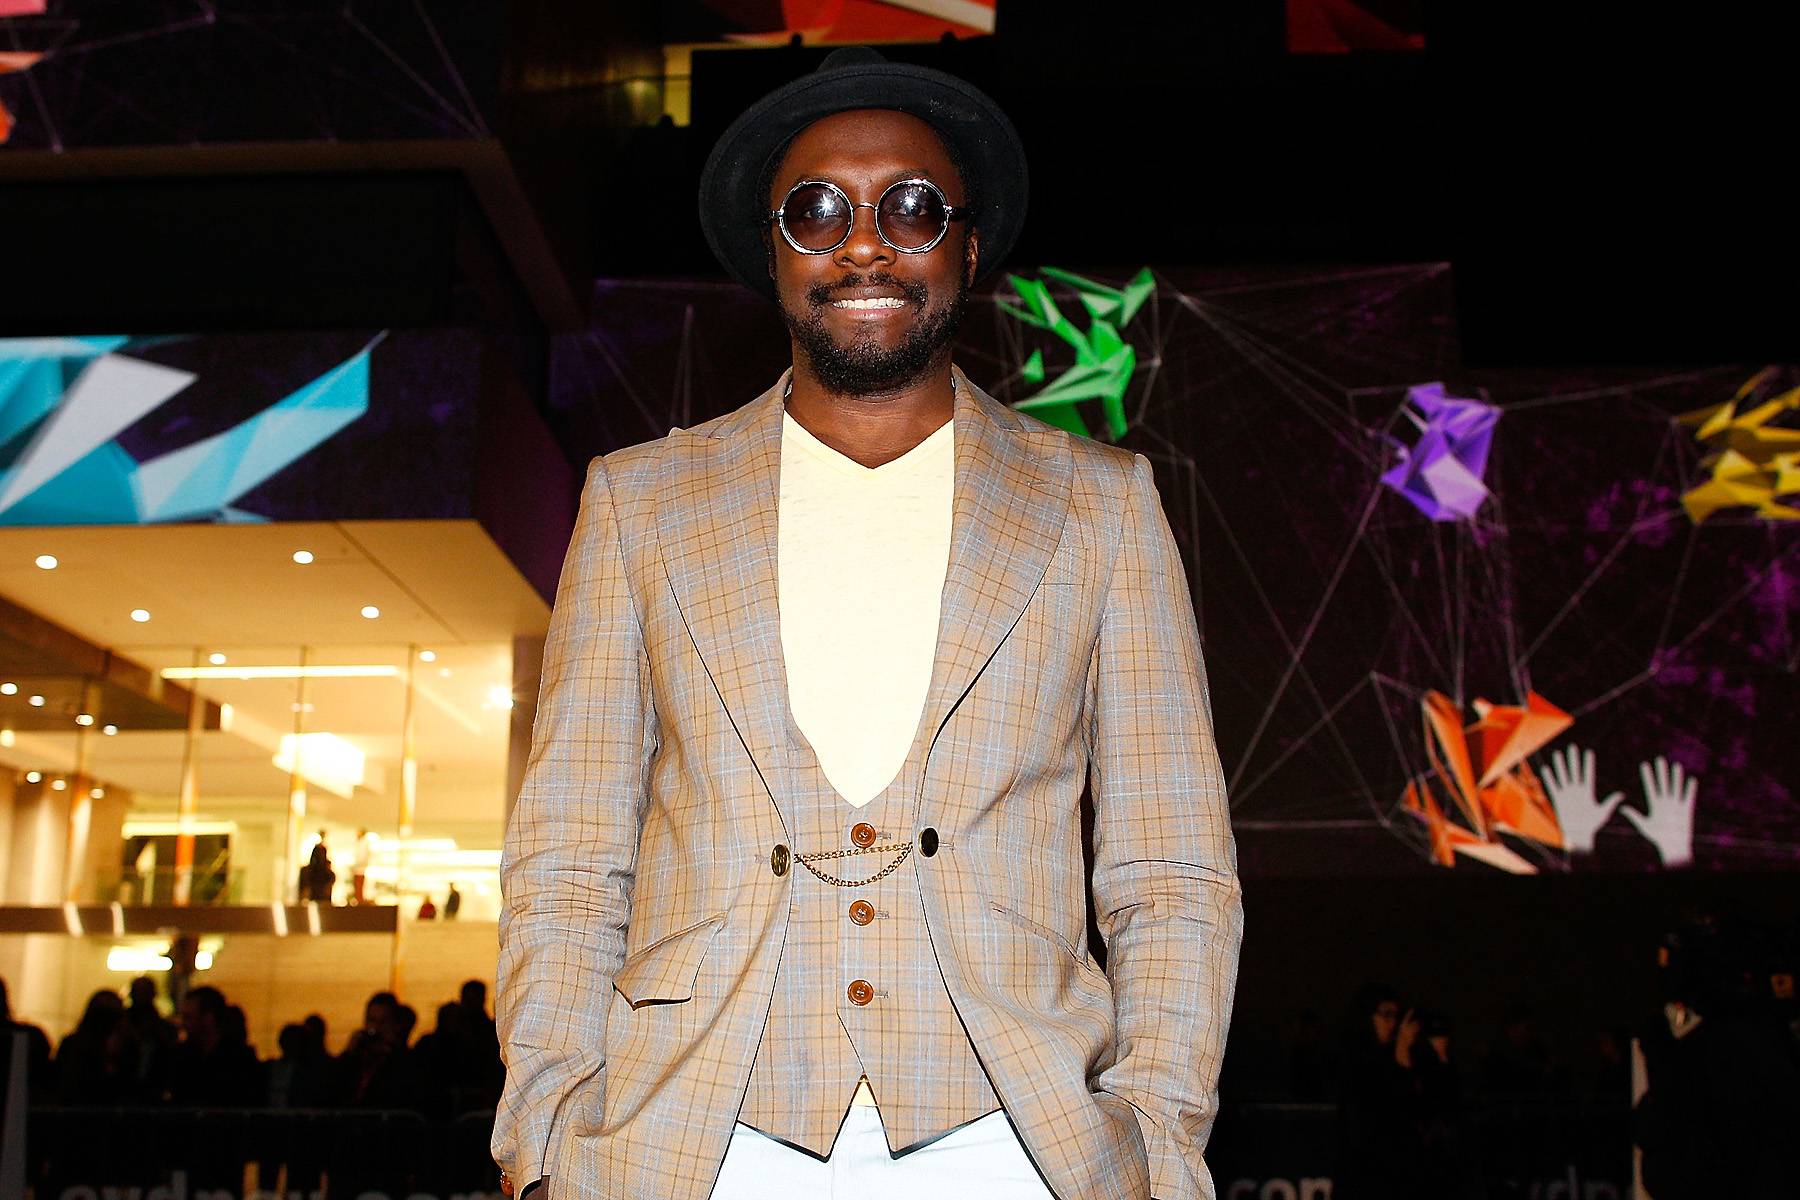 Sir William - Will.i.am poses outside of the Museum of Contemporary Art during Vivid Sydney wearing an Old English plaid sport coat and matching vest in Sydney, Australia. (Photo: Brendon Thorne/Getty Images)